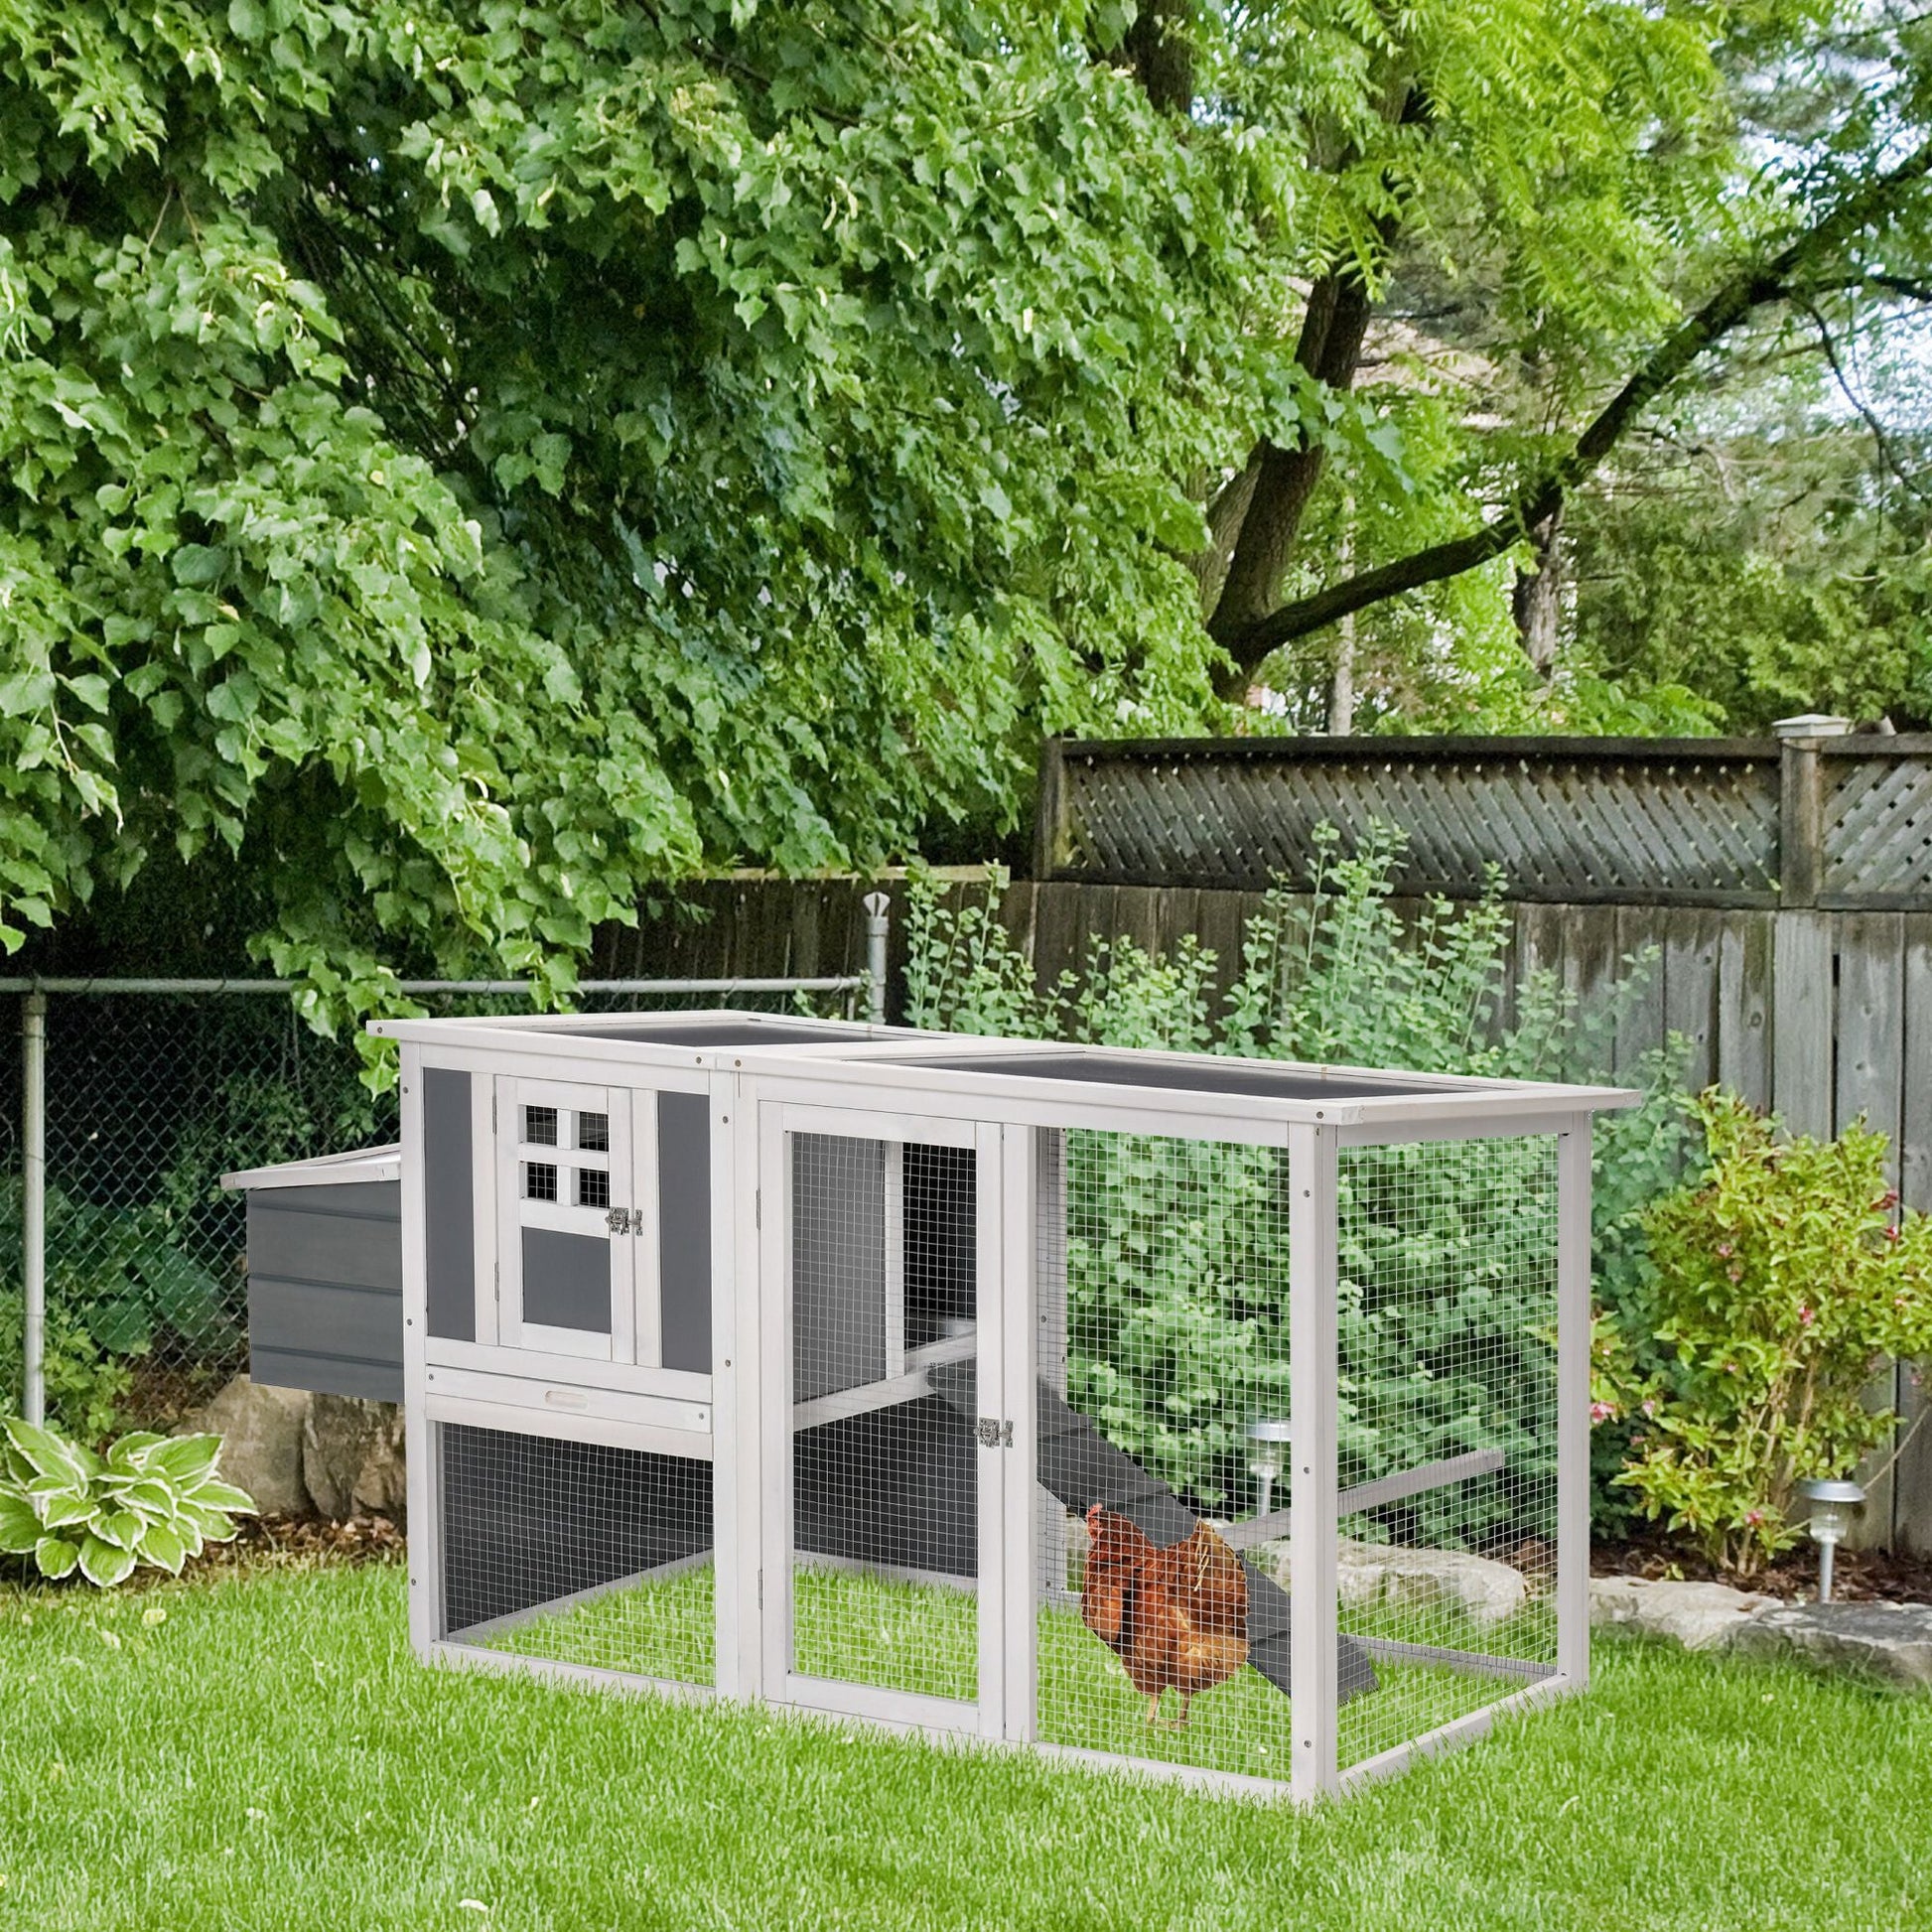 64" Wooden Chicken Coop, Outdoor Hen House Poultry Cage with Outdoor Run, Nesting Box, Removable Tray, Openable Hollow Sheet Roof and Lockable Doors at Gallery Canada